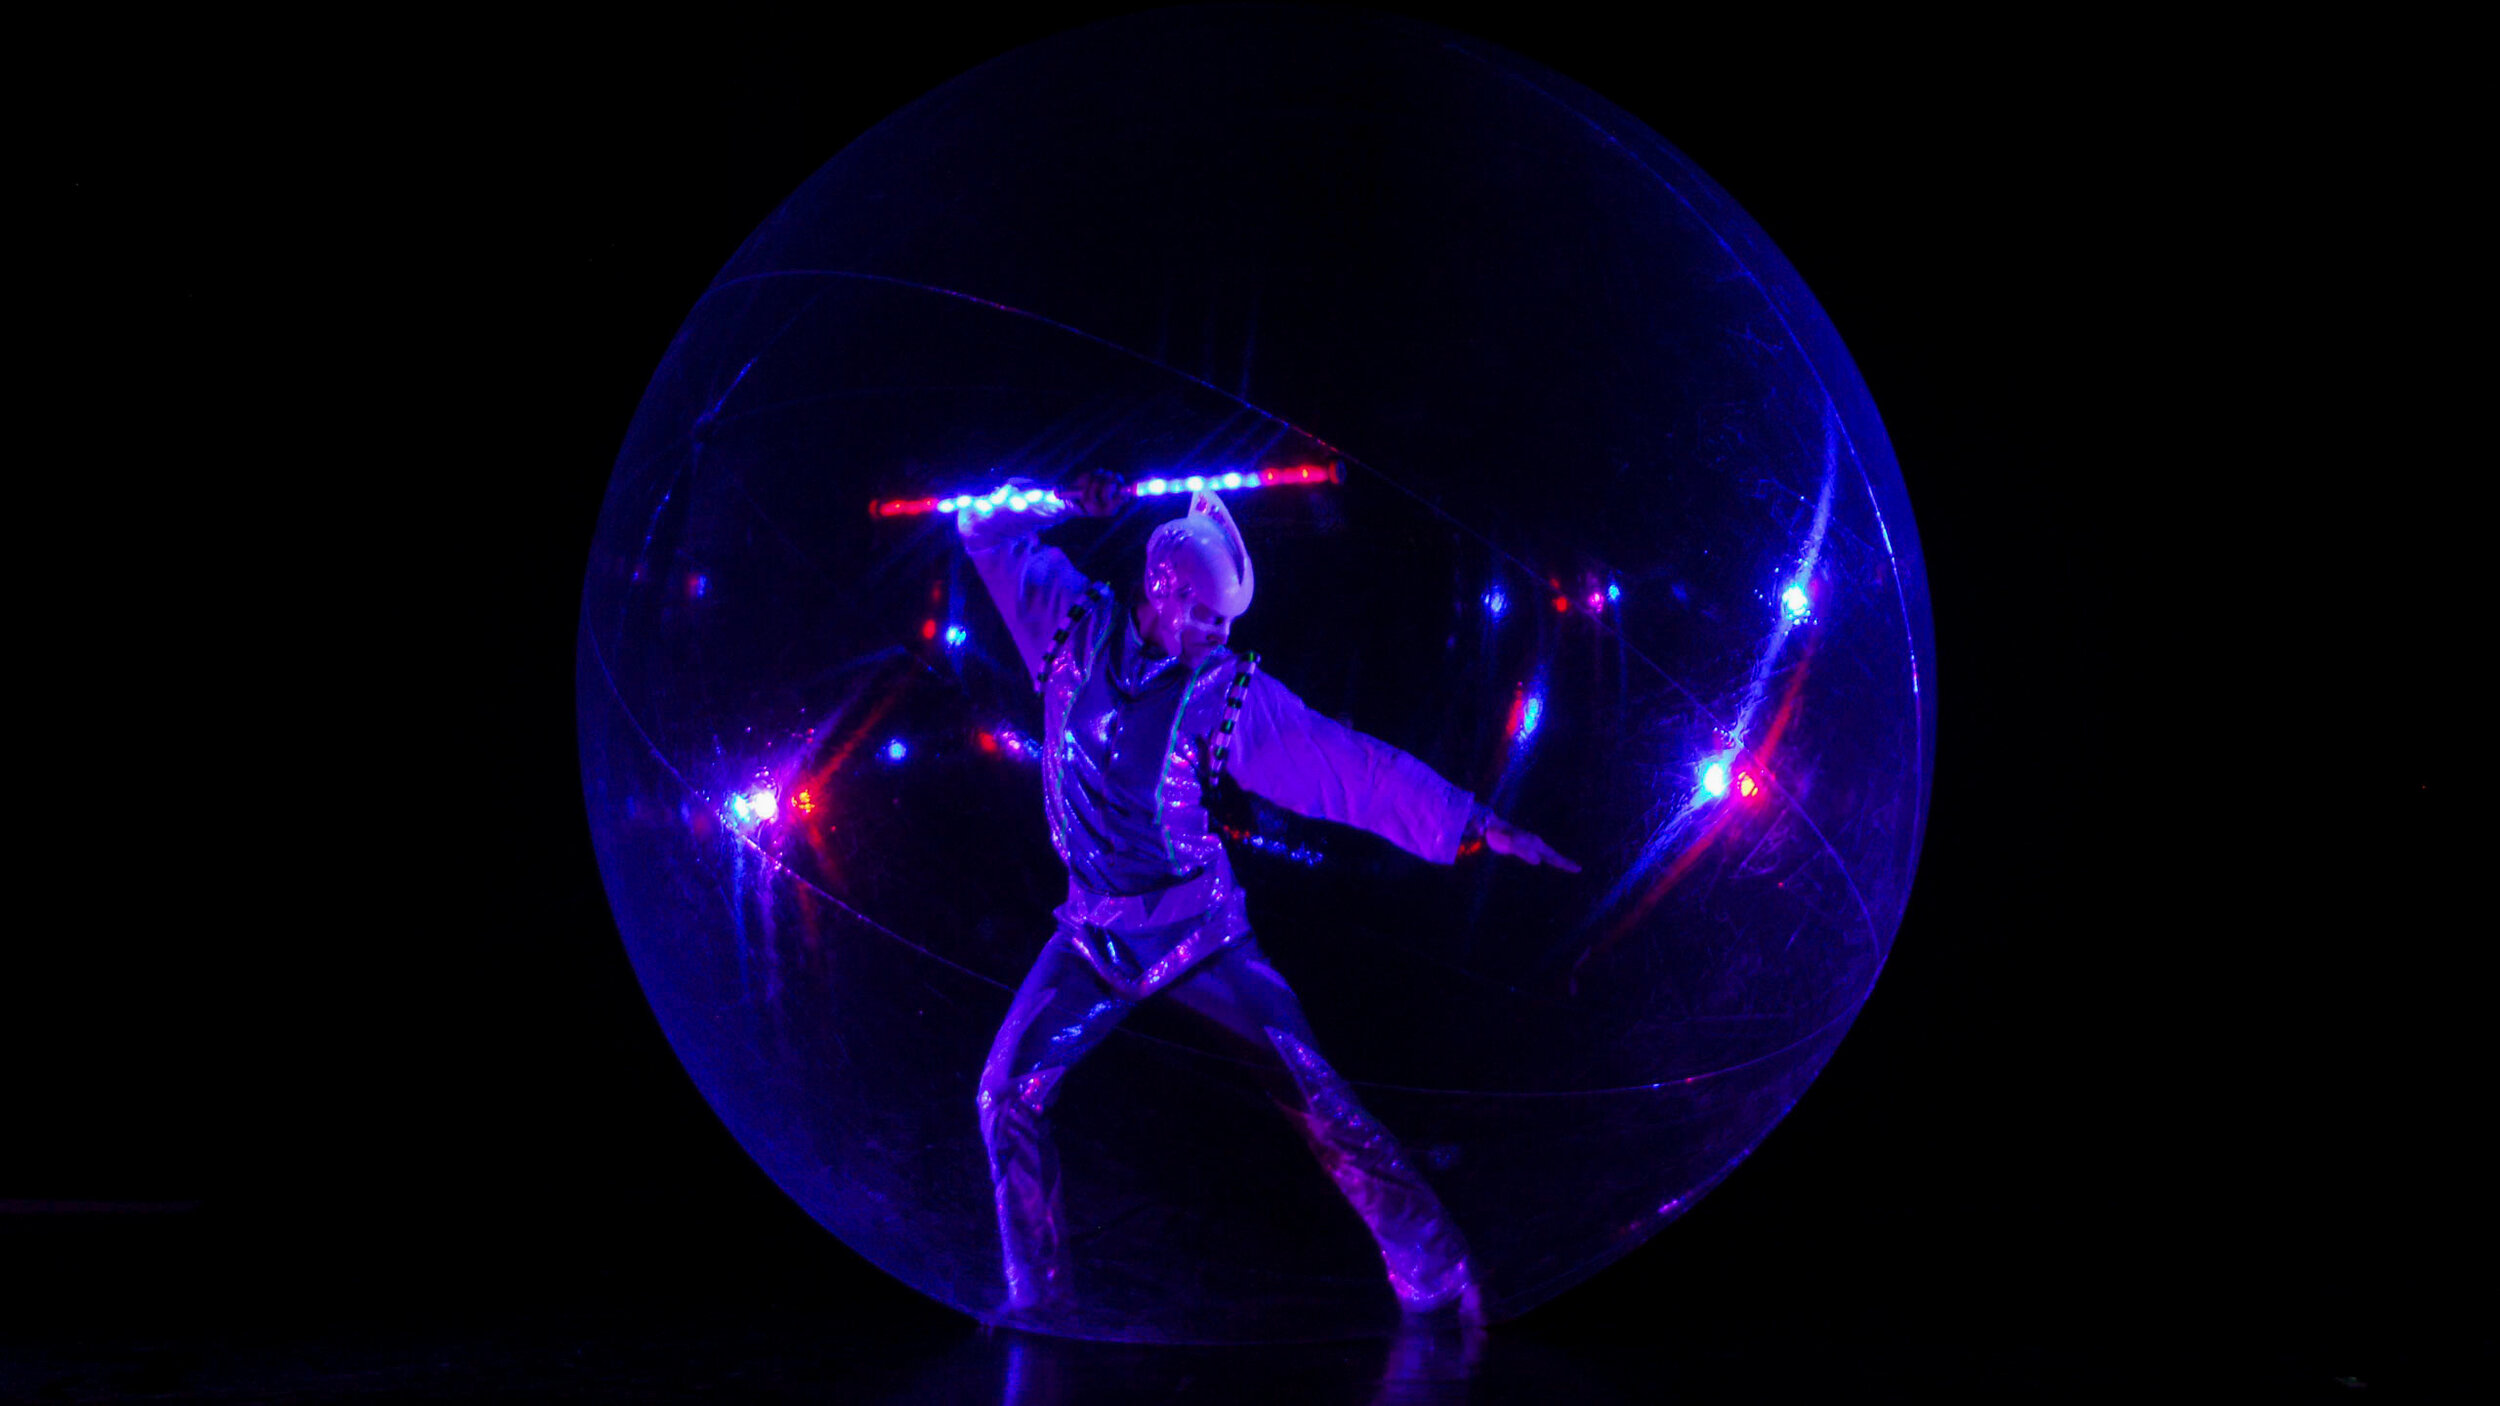 LED Artist in Inflatable Ball, Vienna, Austria